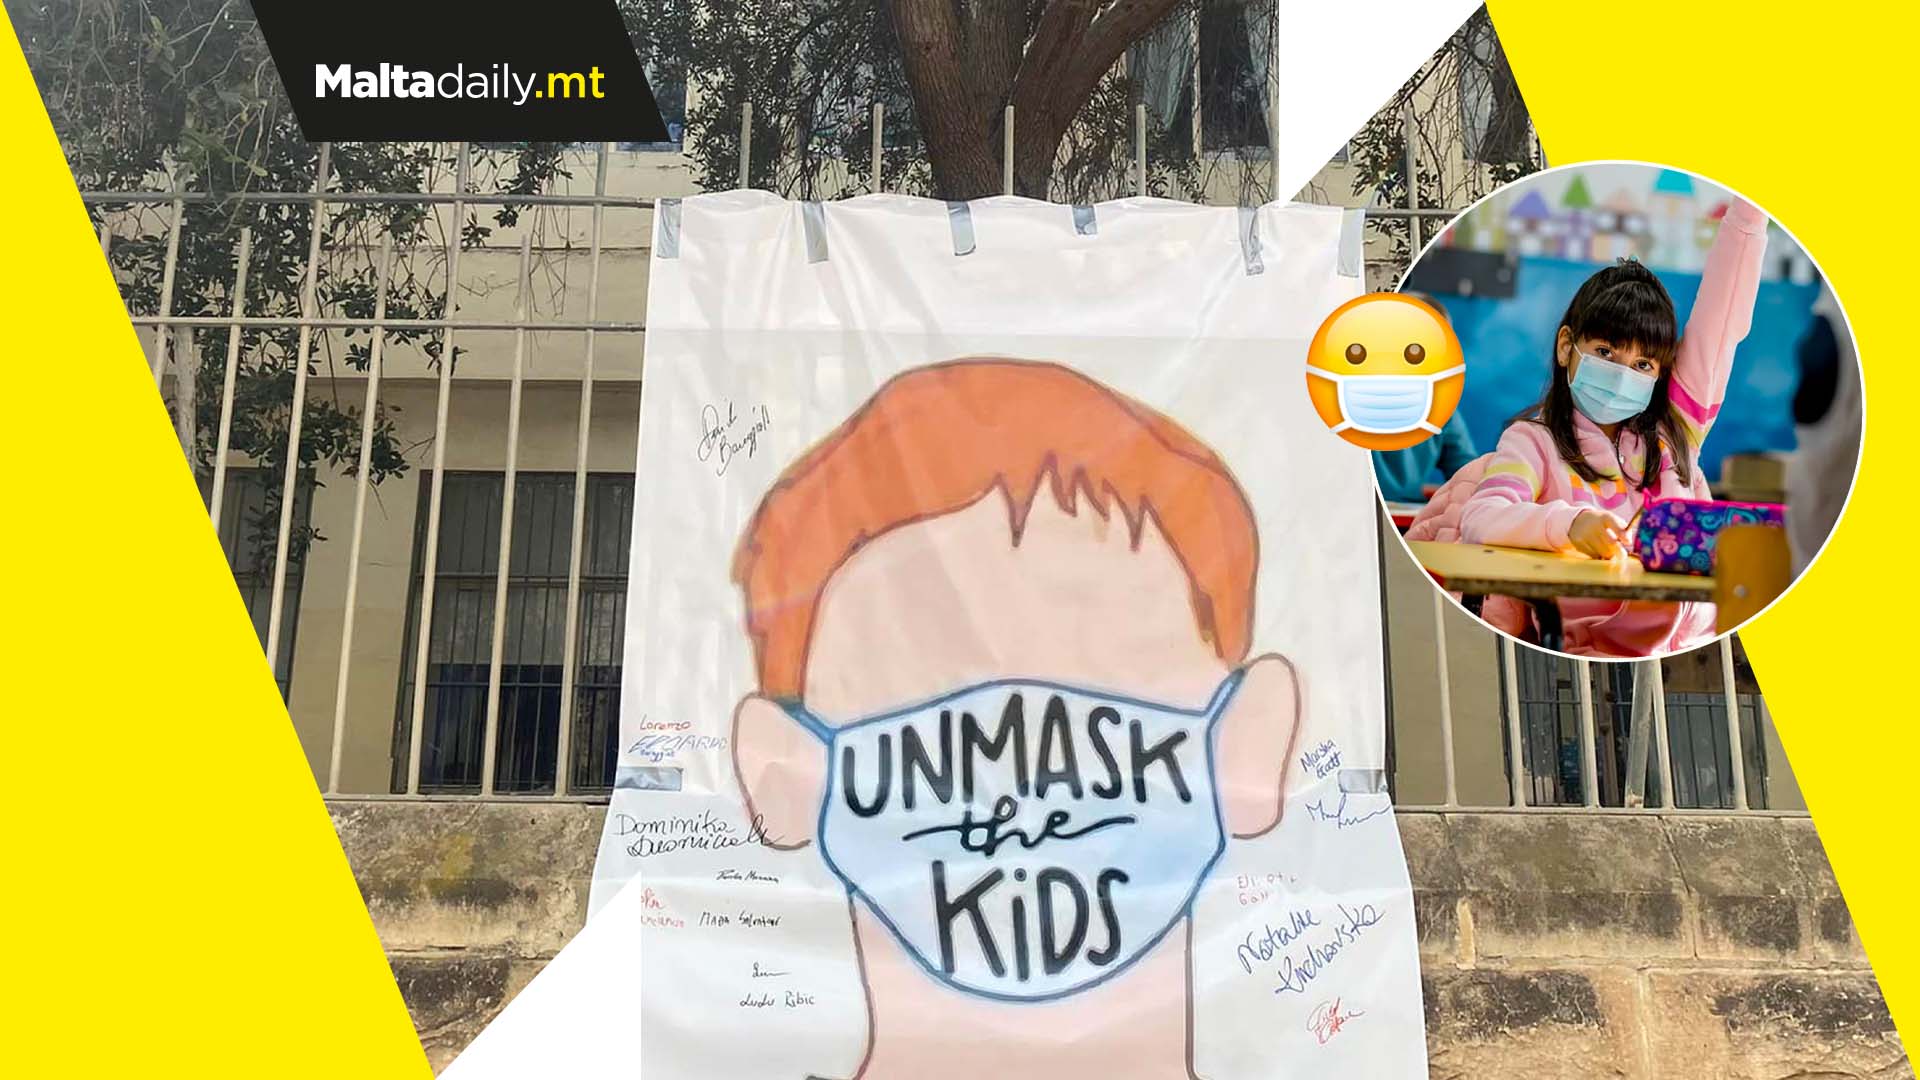 One man protests to ‘unmask the kids’ and hands out proper masks